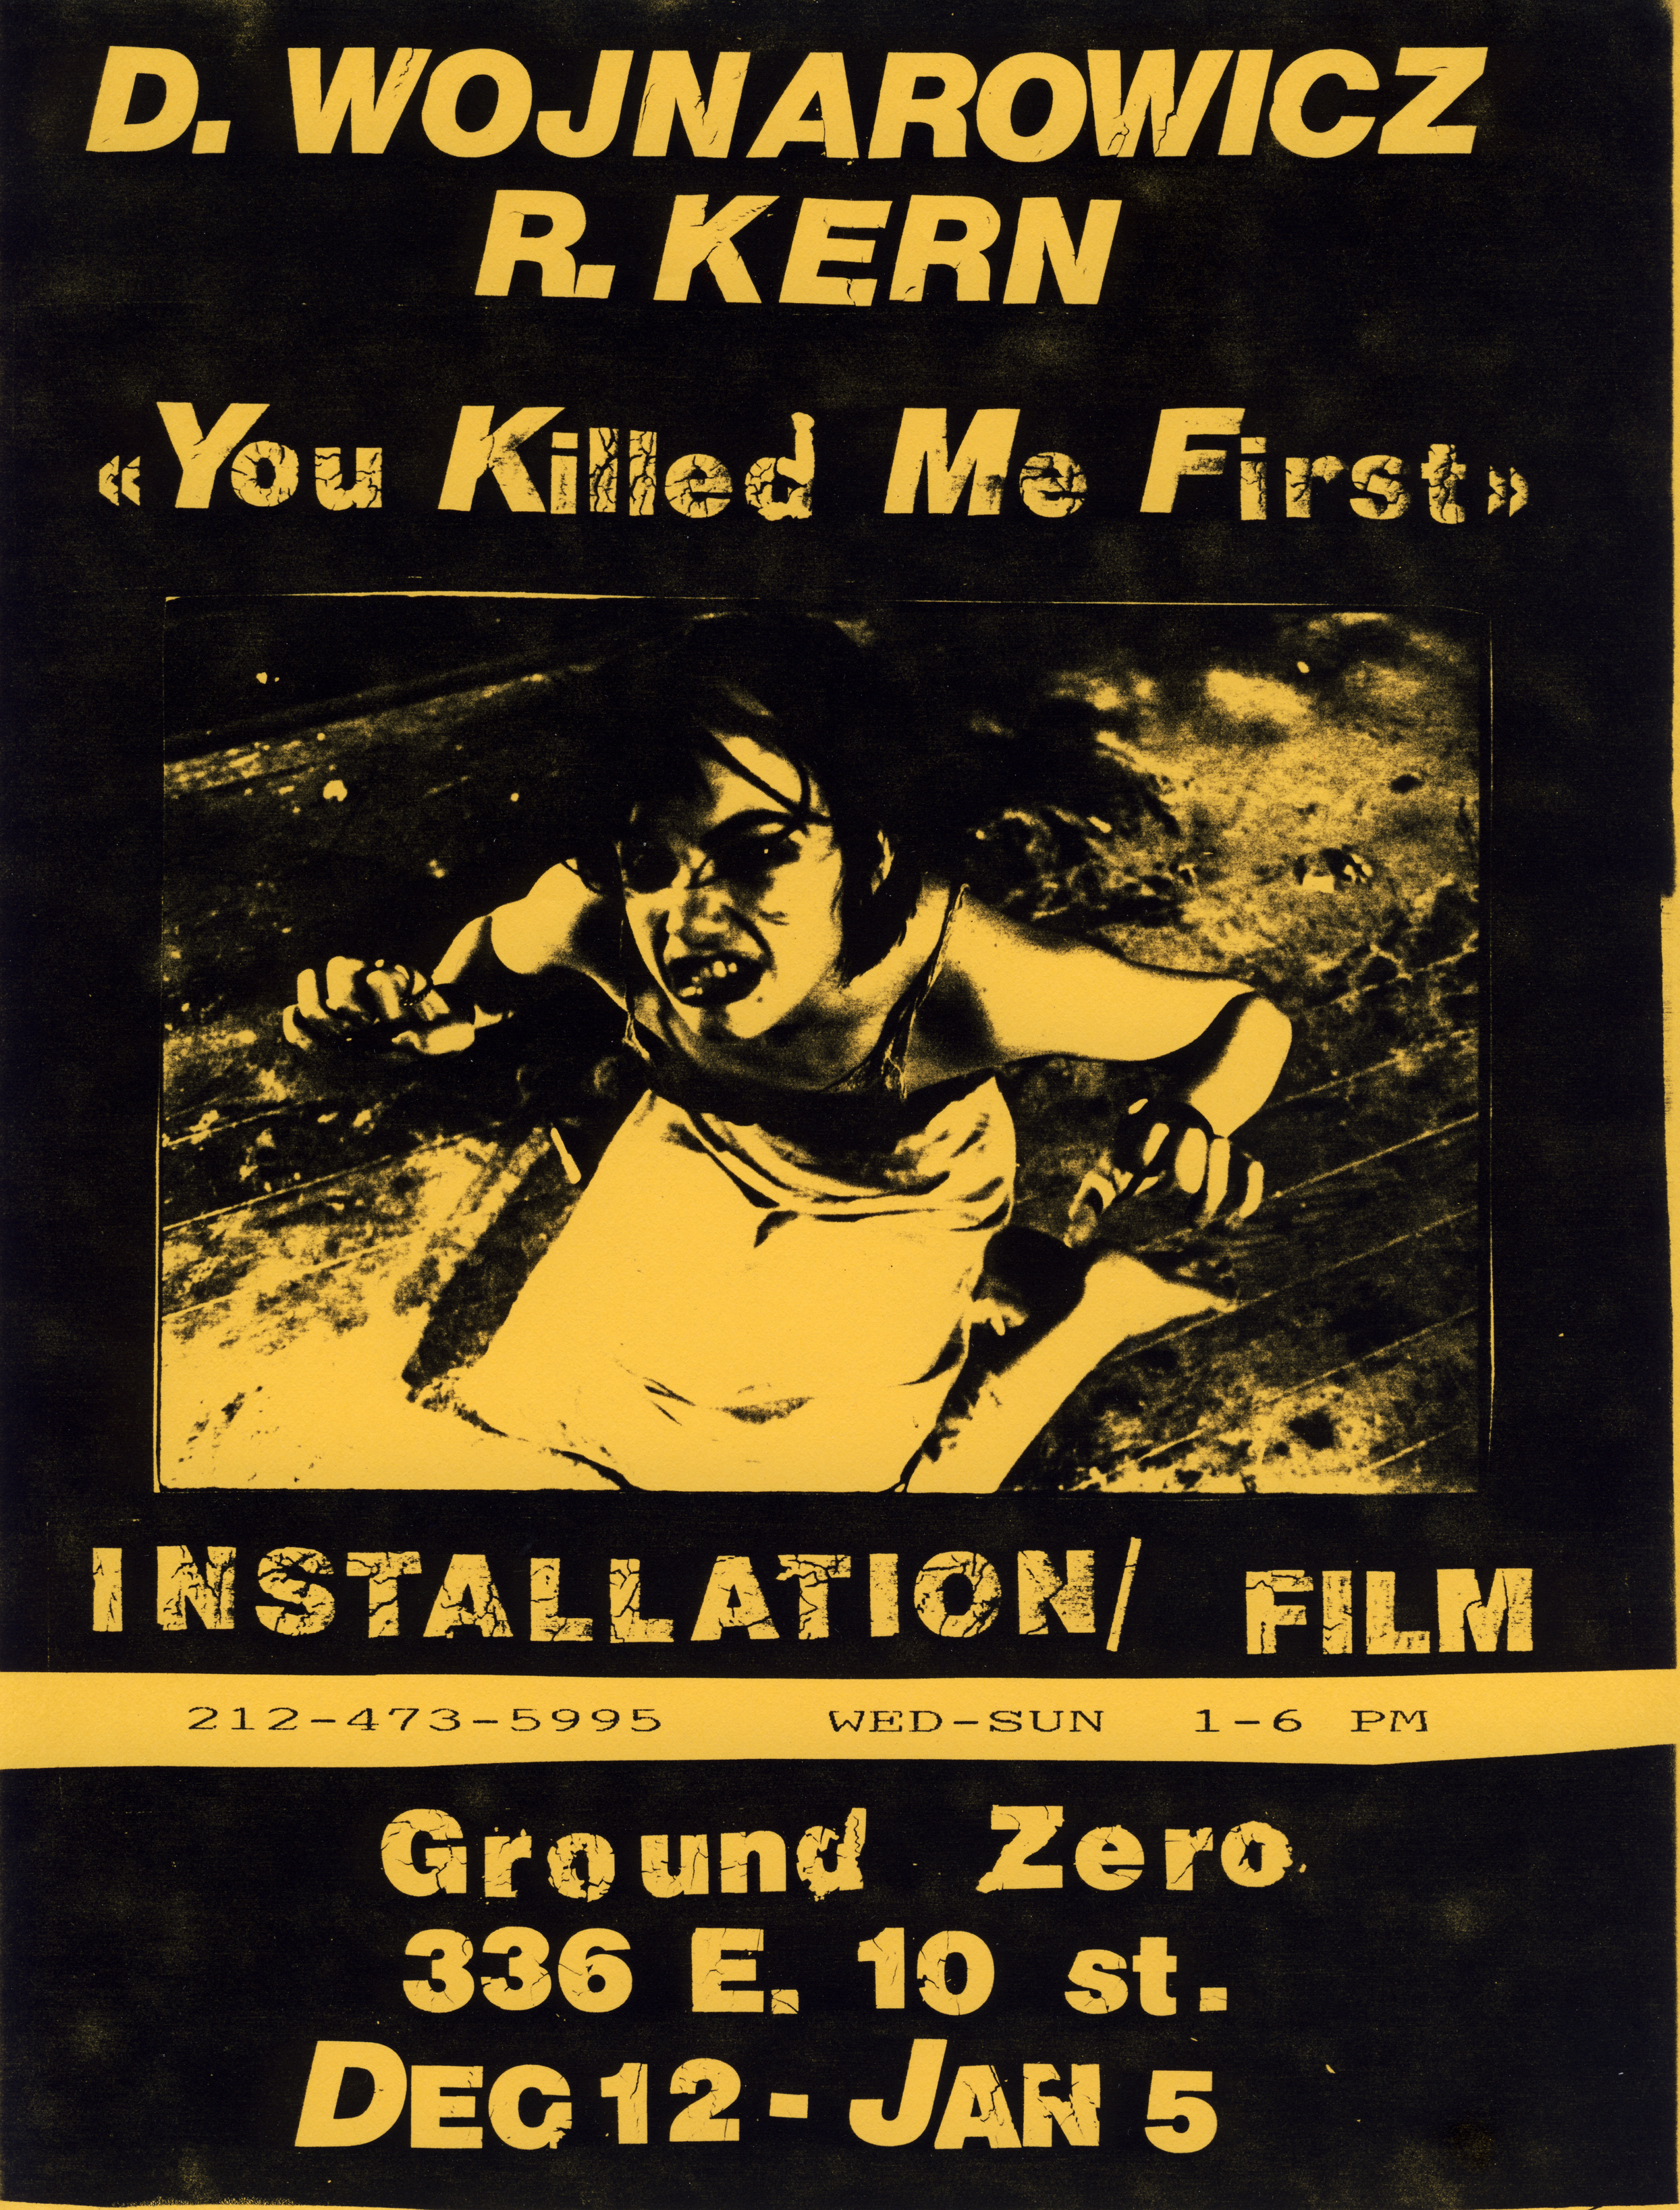 Poster for "You Killed Me First" installation/film by Richard Kerns with David Wojnarowicz 1985